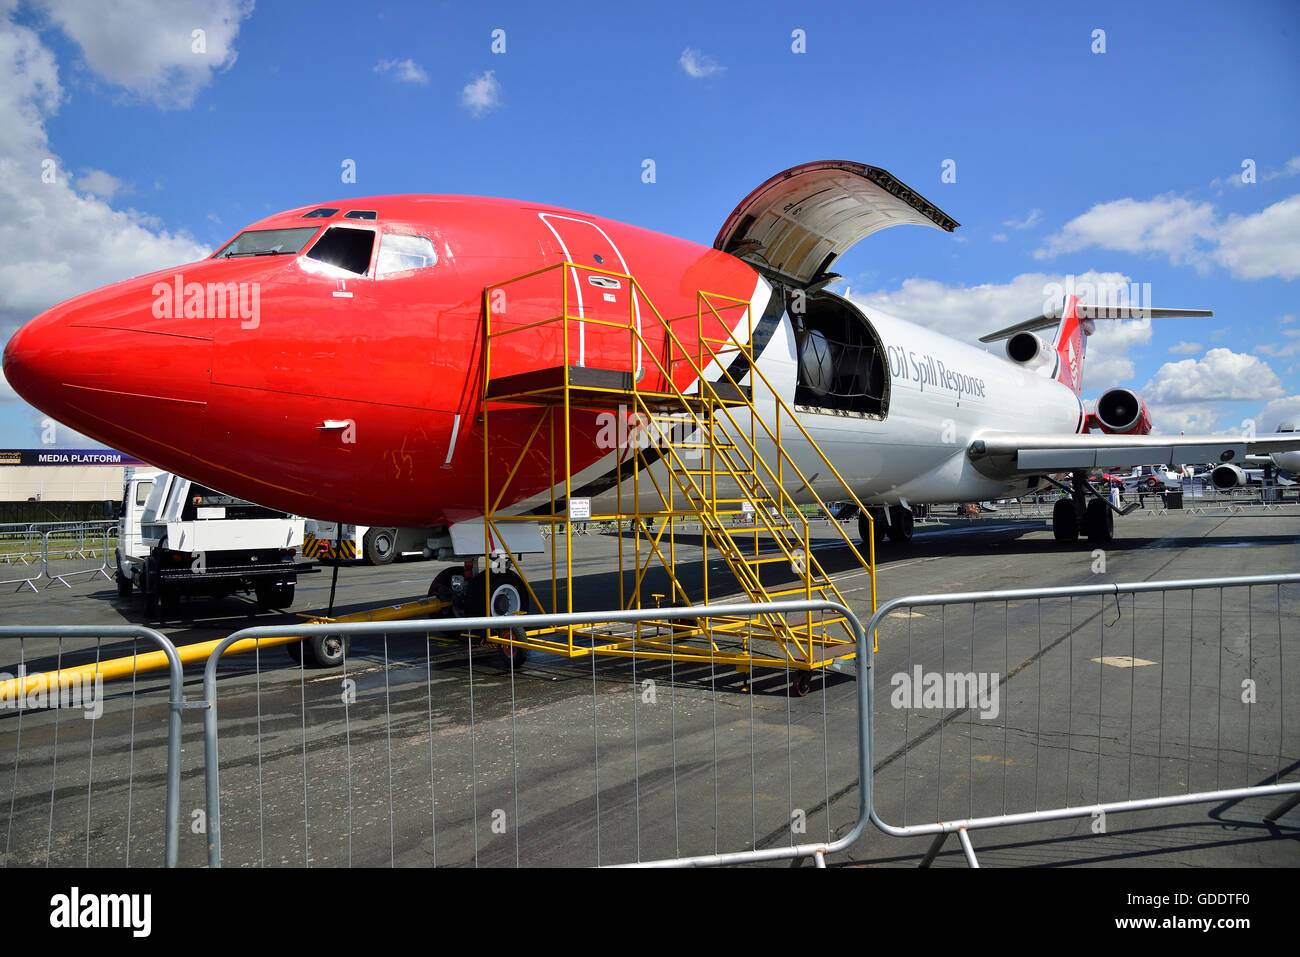 Farnborough, Hampshire, UK. 14th July, 2016. Day 4 of the Farnborough International  Airshow. Boeing's 727 adapted for Oil Spill Response  with  its spray system fitted underneath at the rear.  Oil Spill Response travels worldwide responding to industry oil spillage  Friday 15th celebrates  the centenary of the Boeing company. Credit:  Wendy Johnson/Alamy Live News Stock Photo